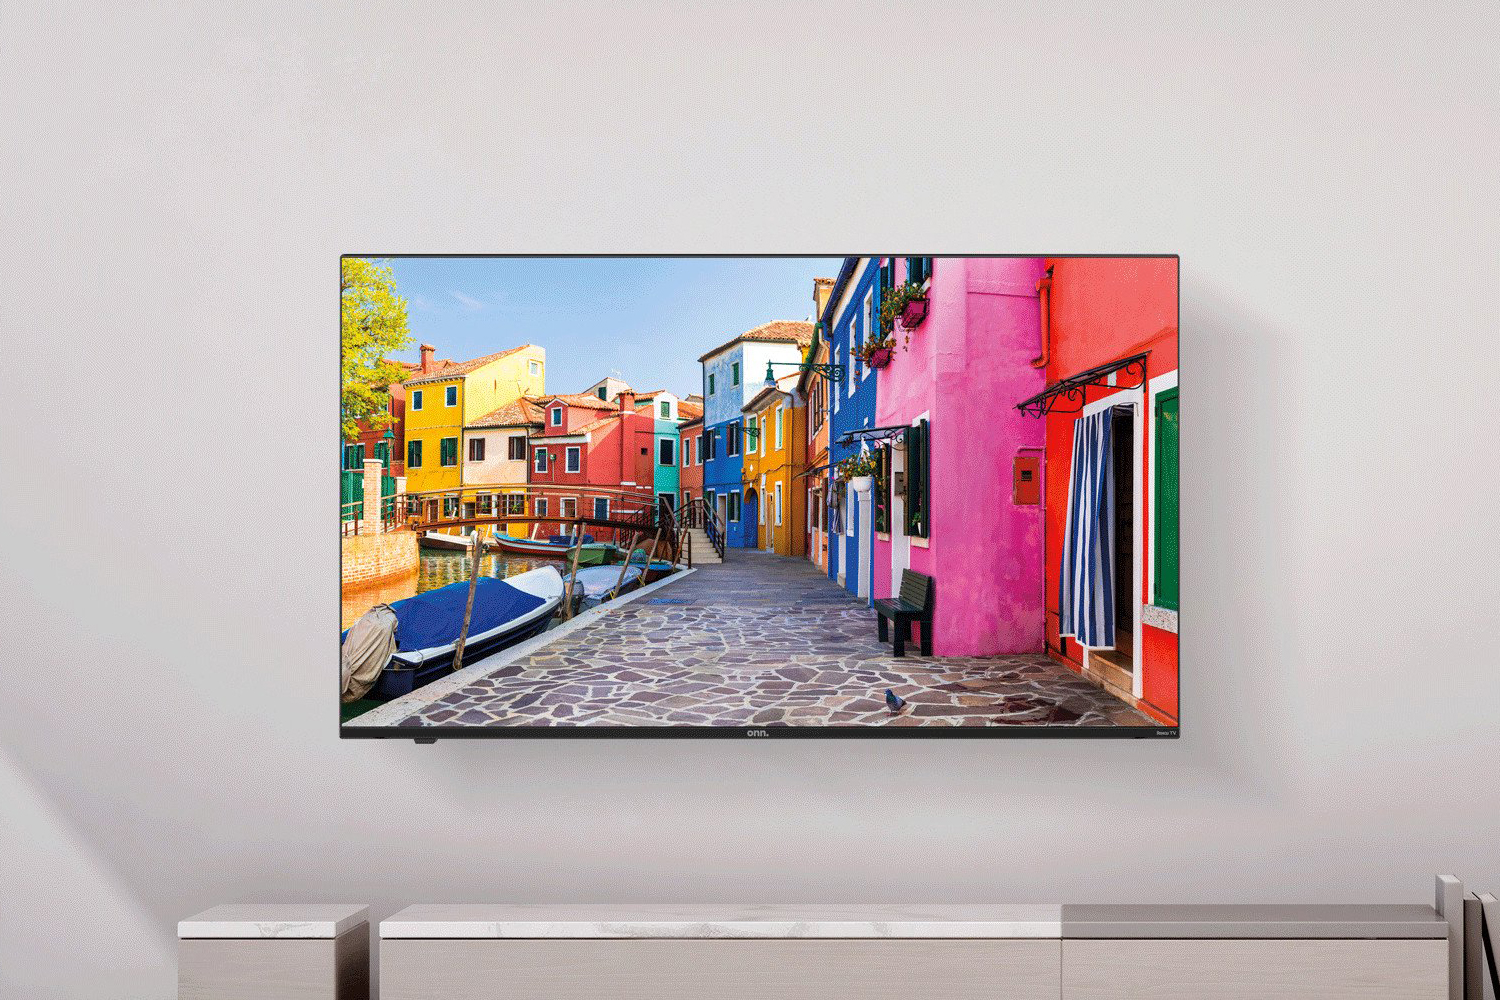 You won’t believe how cheap this 65-inch QLED TV is
today